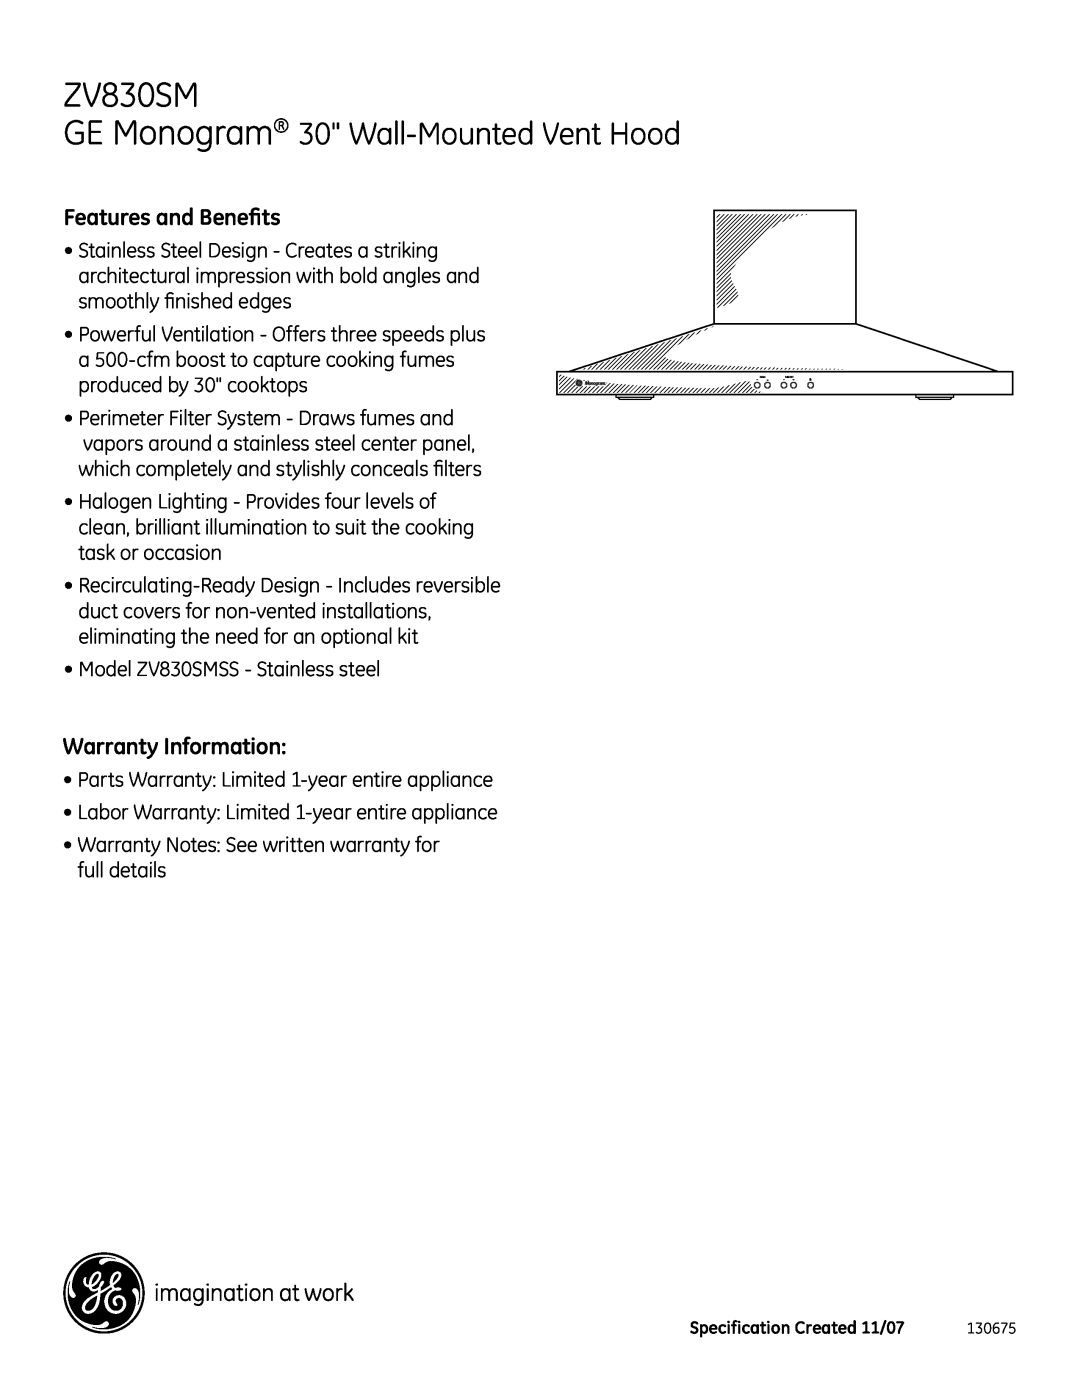 GE Monogram ZV830SM dimensions GE Monogram 30 Wall-Mounted Vent Hood, Features and Benefits, Warranty Information 